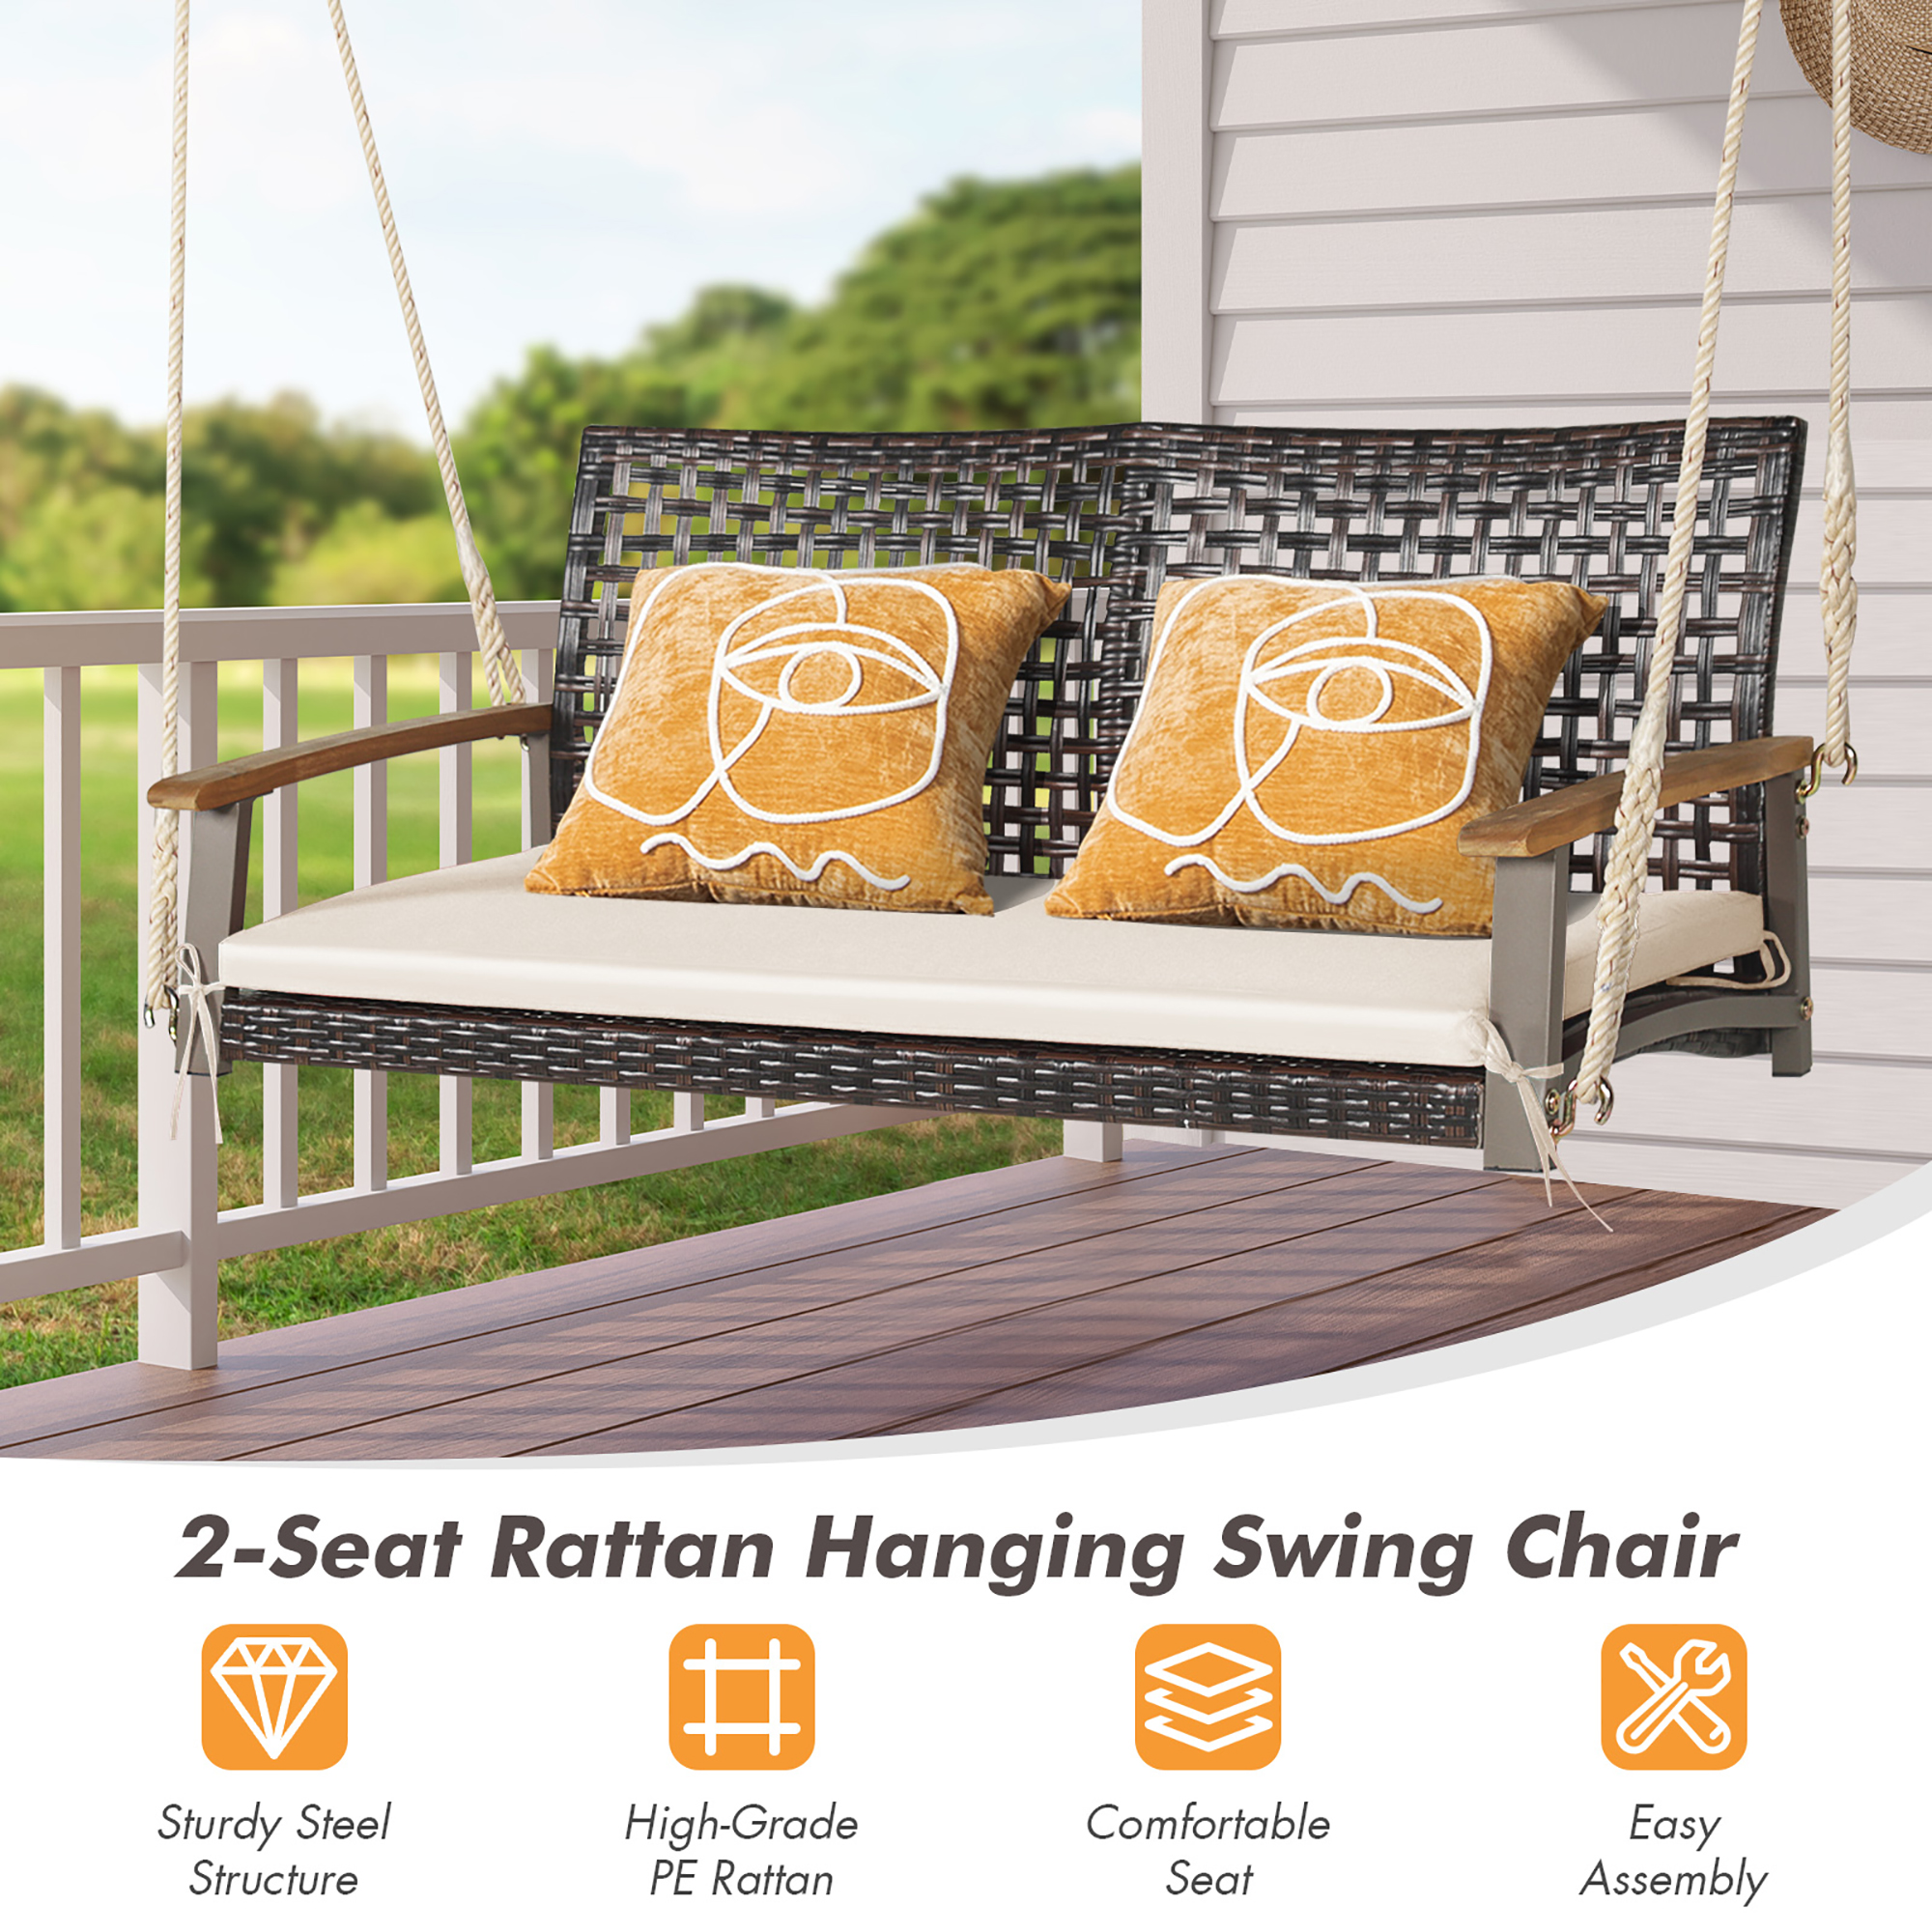 Costway 2-Person Patio Rattan Hanging Swing Chair Porch Loveseat Cushion Off White - image 5 of 10